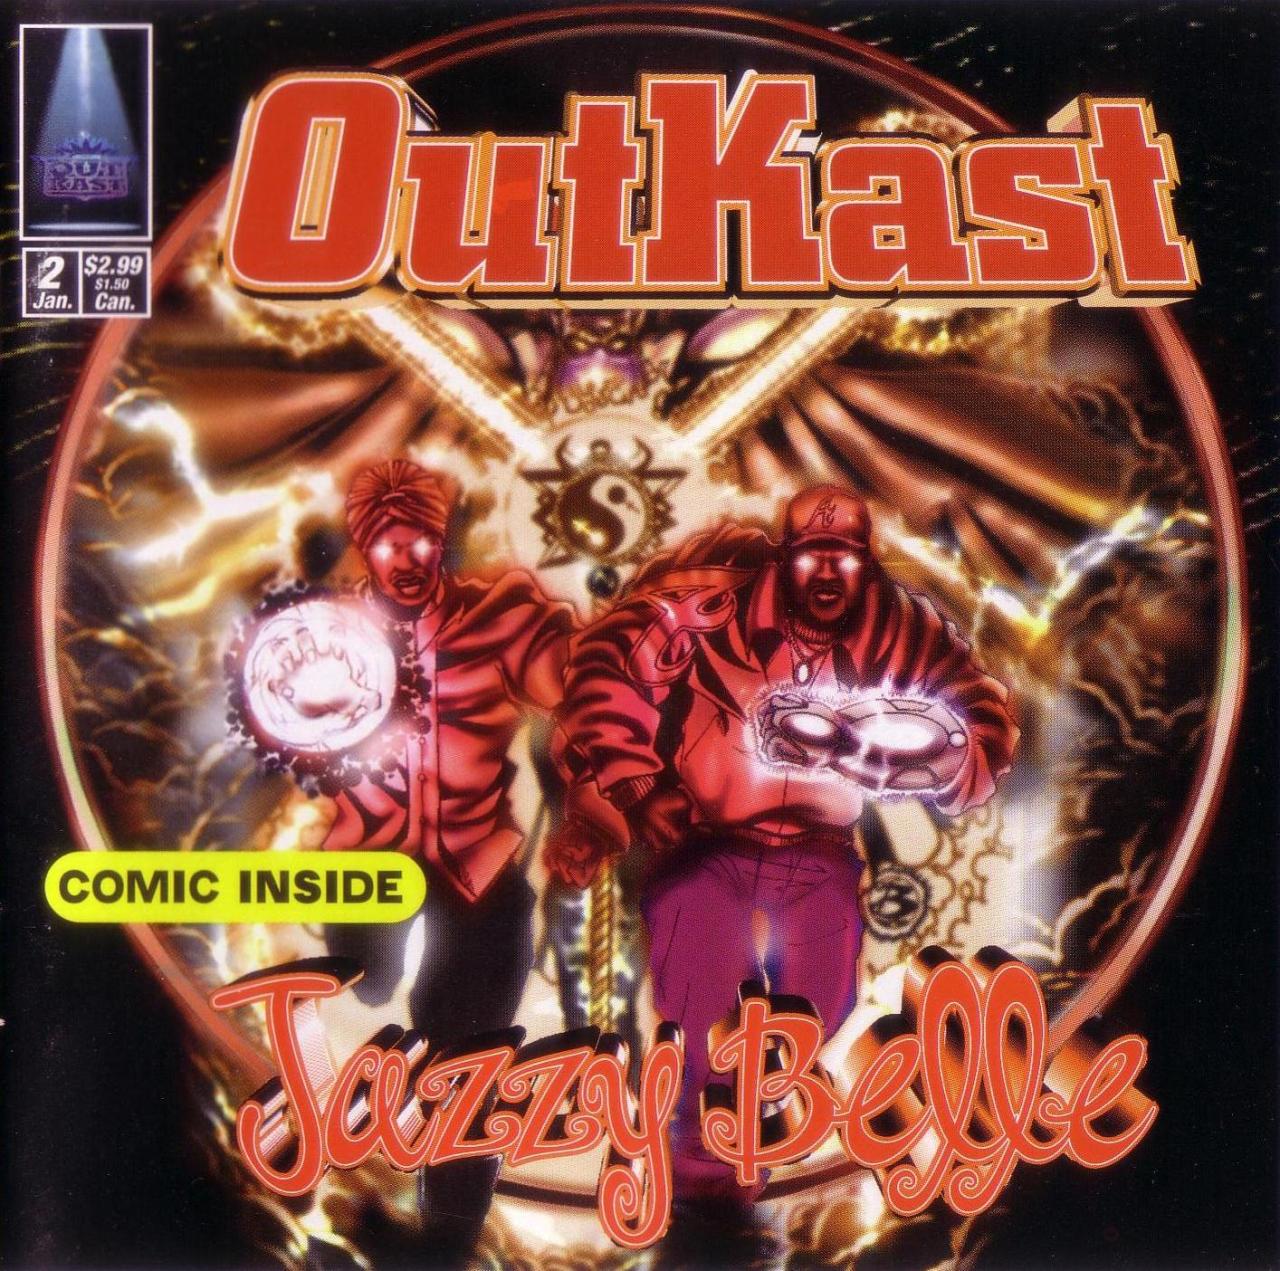 BACK IN THE DAY |1/27/97| Outkast released the 3rd single, Jazzy Belle, off of their